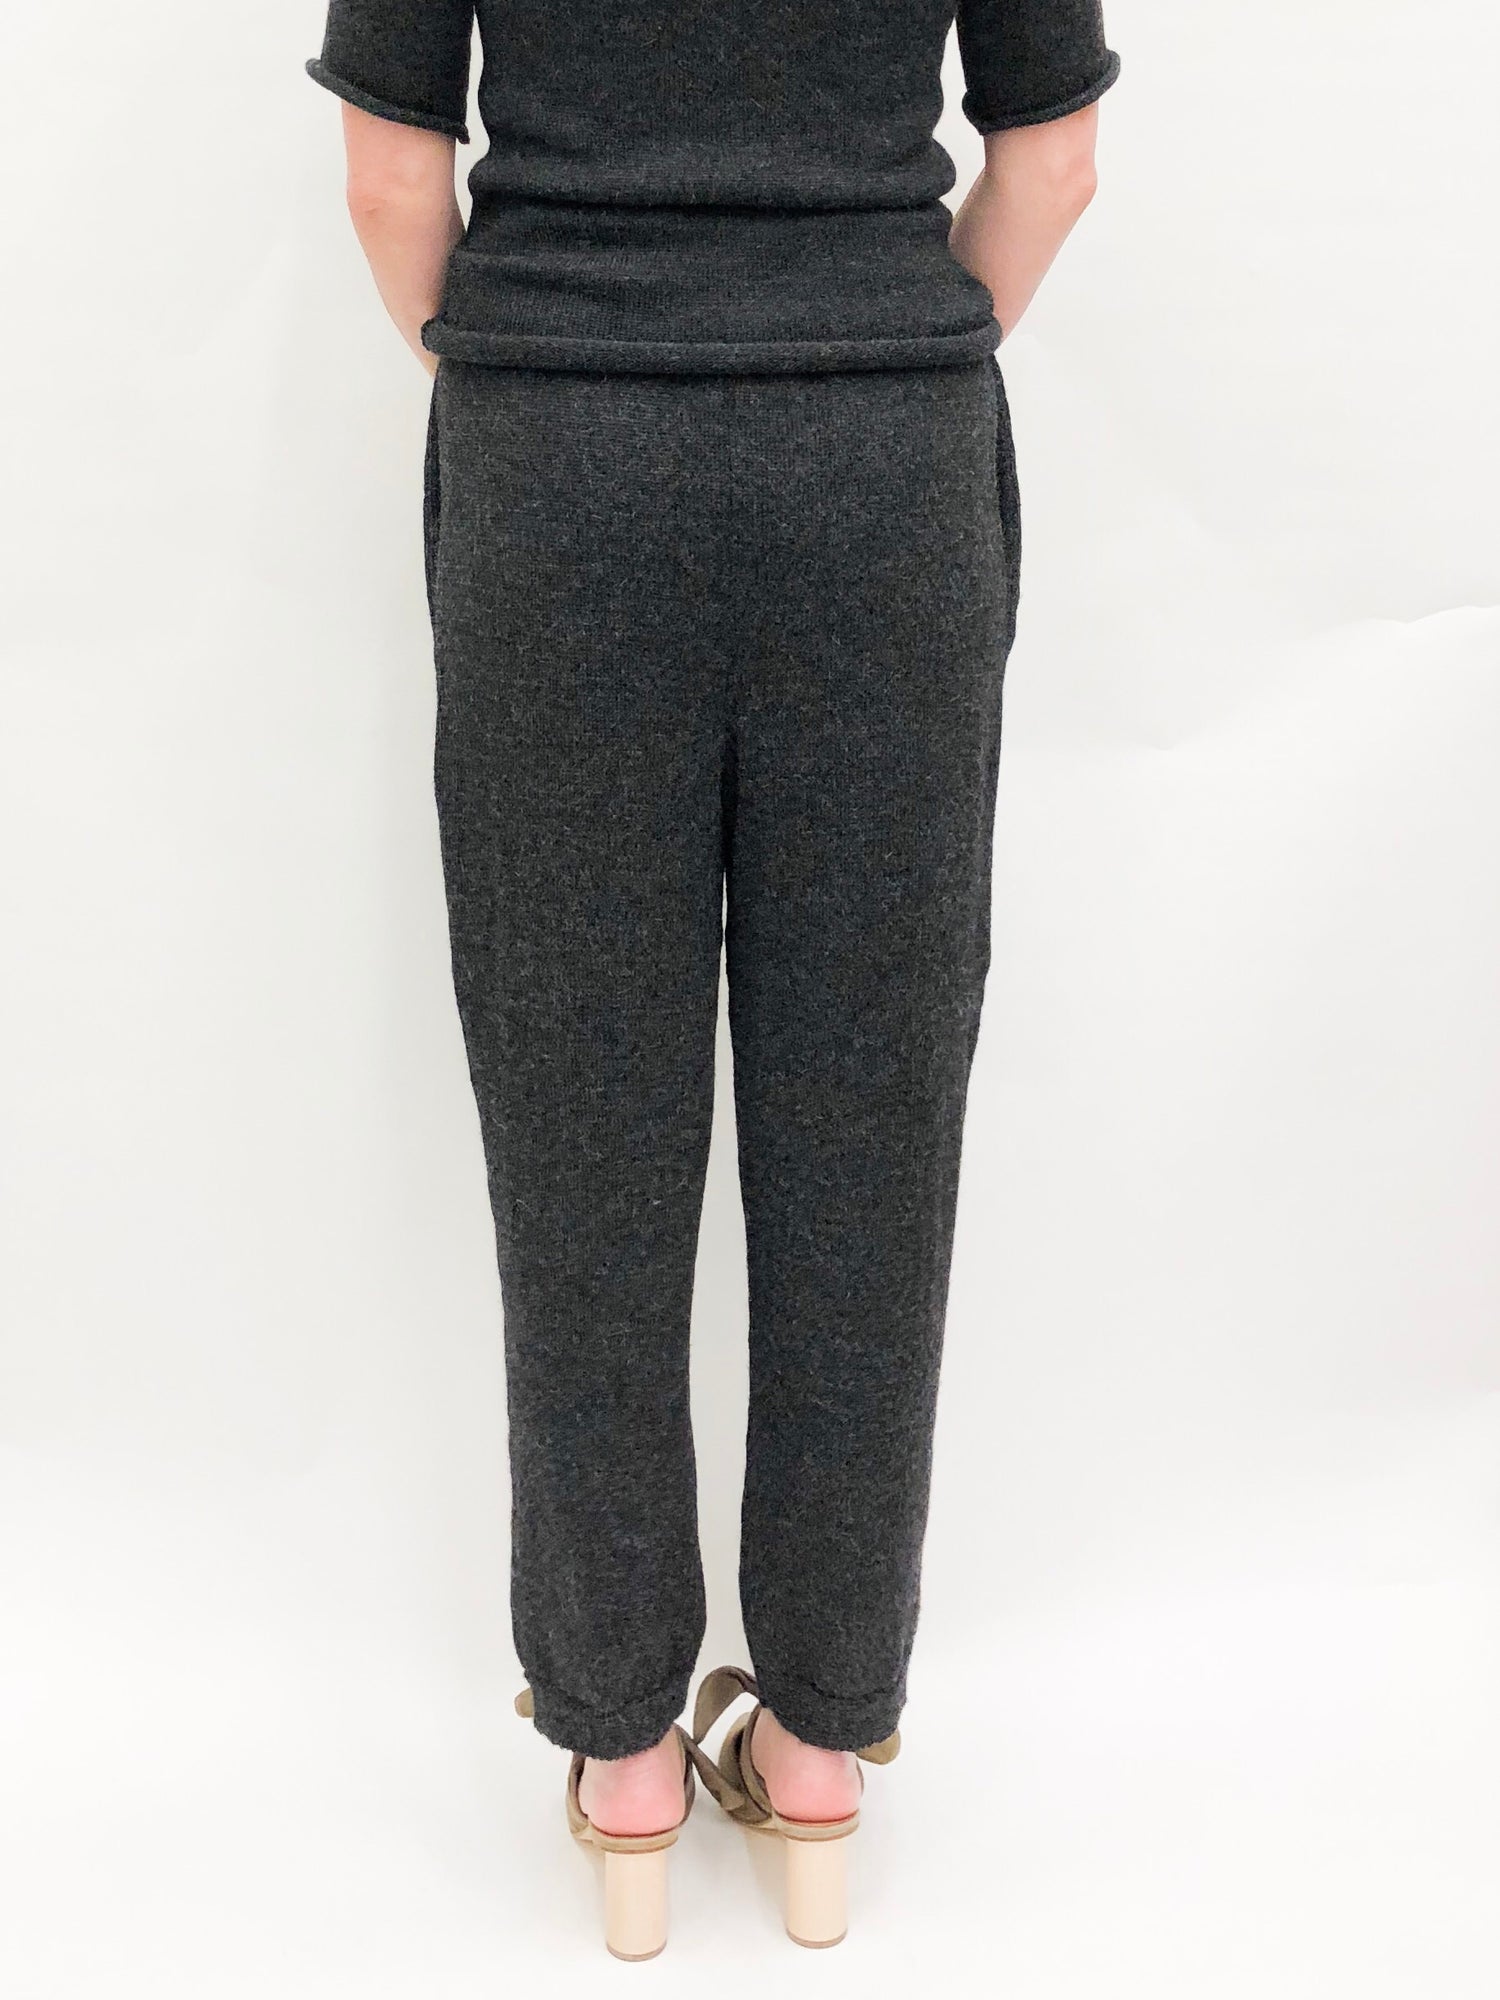 mid-weight trouser - basic. 